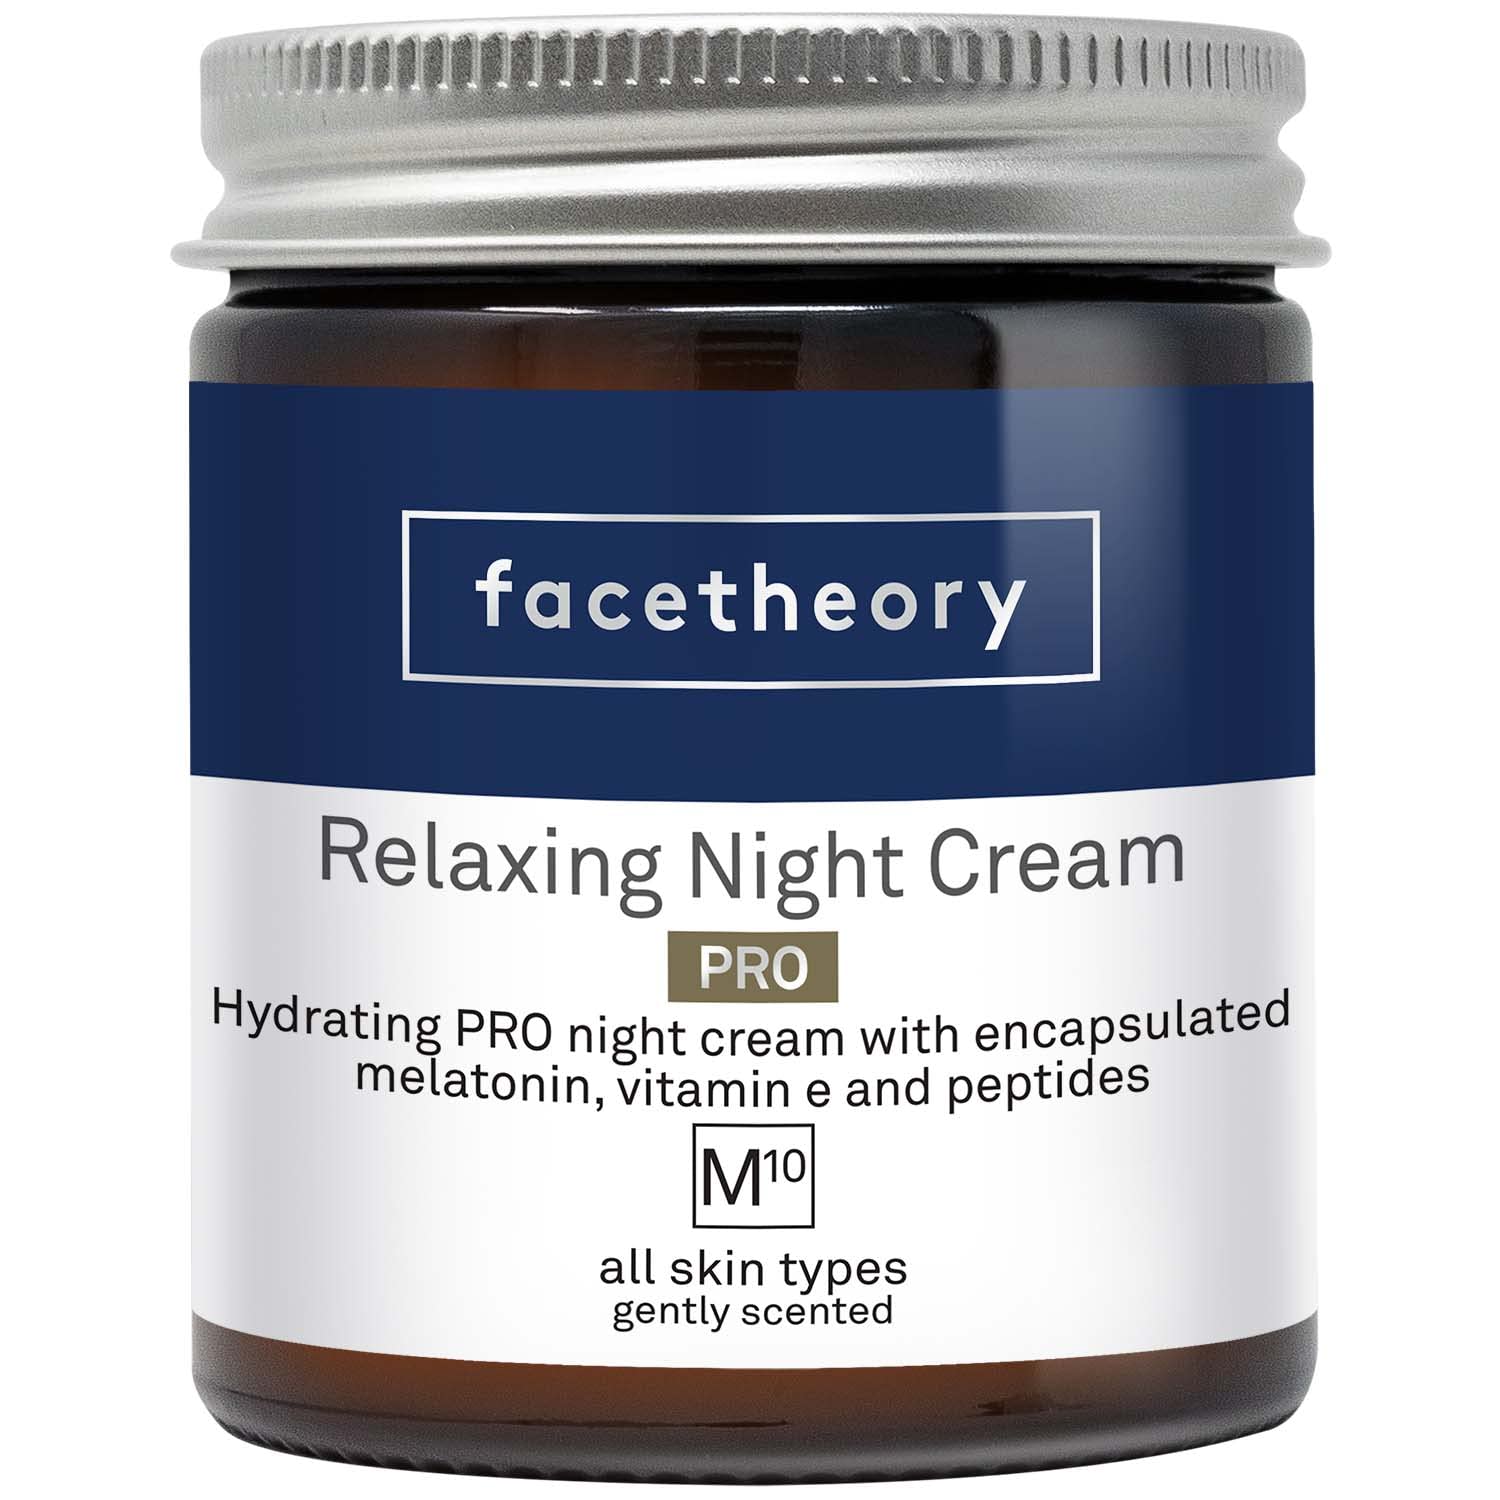 Facetheory Relaxing Night Cream M10 PRO with Vitamin E | Anti-Ageing Cream for Women | Reduces Fine Lines | Promotes Skin Repair & Regeneration | Vegan & Cruelty-Free | Made in UK | Lavender | 50ml